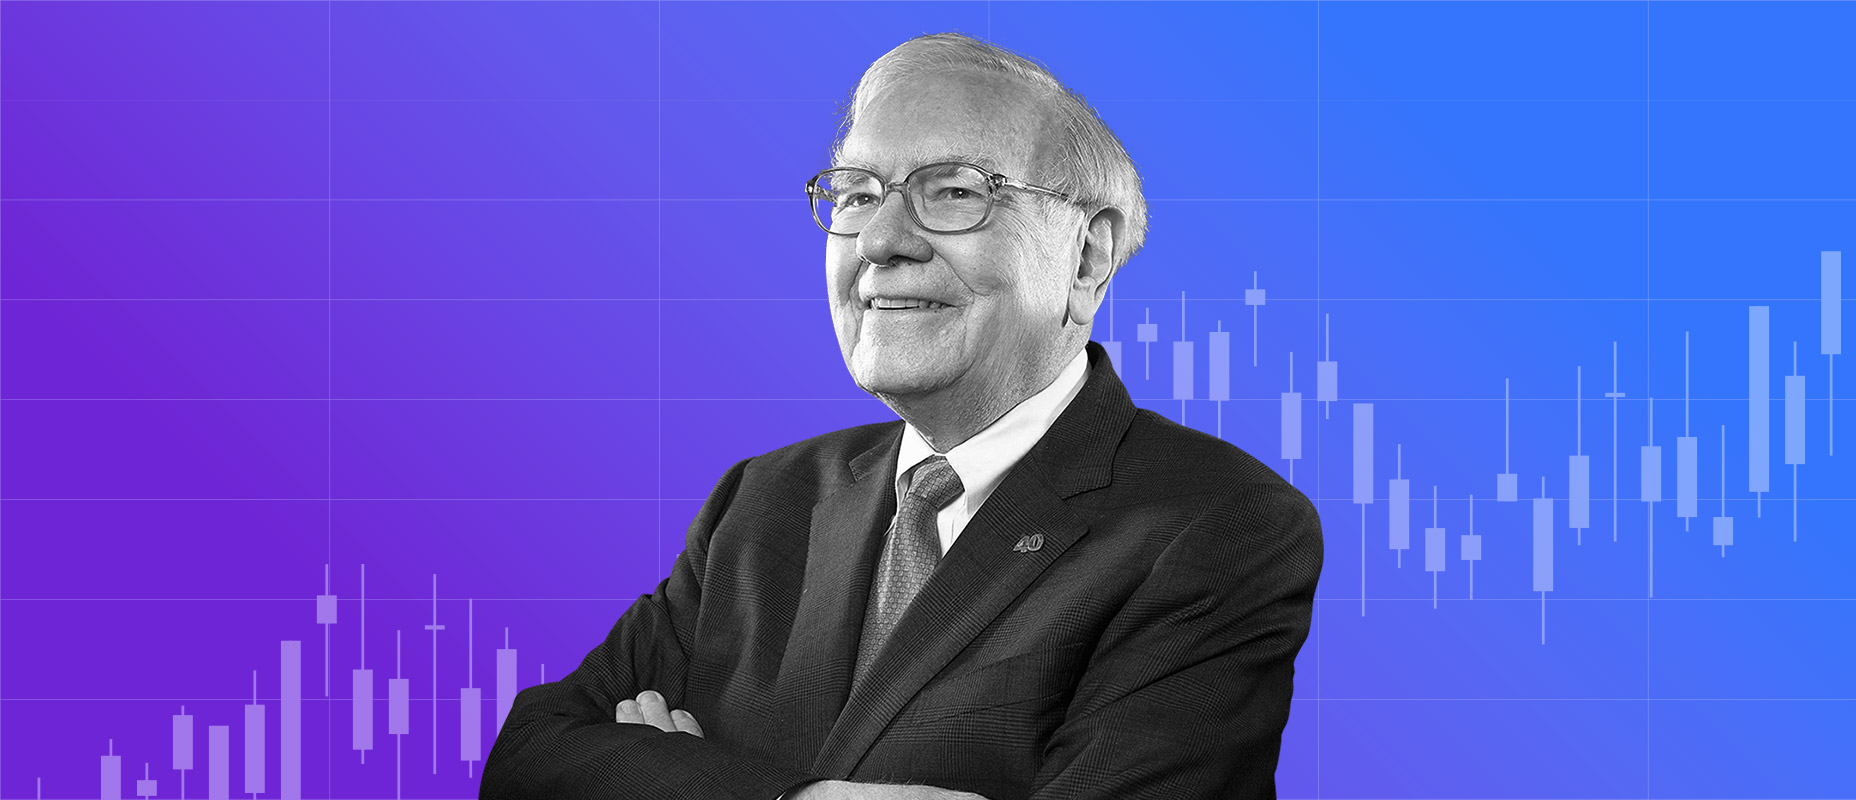 Whether Buffett’s Stake on Oil and Gas Sector Is Paying Off